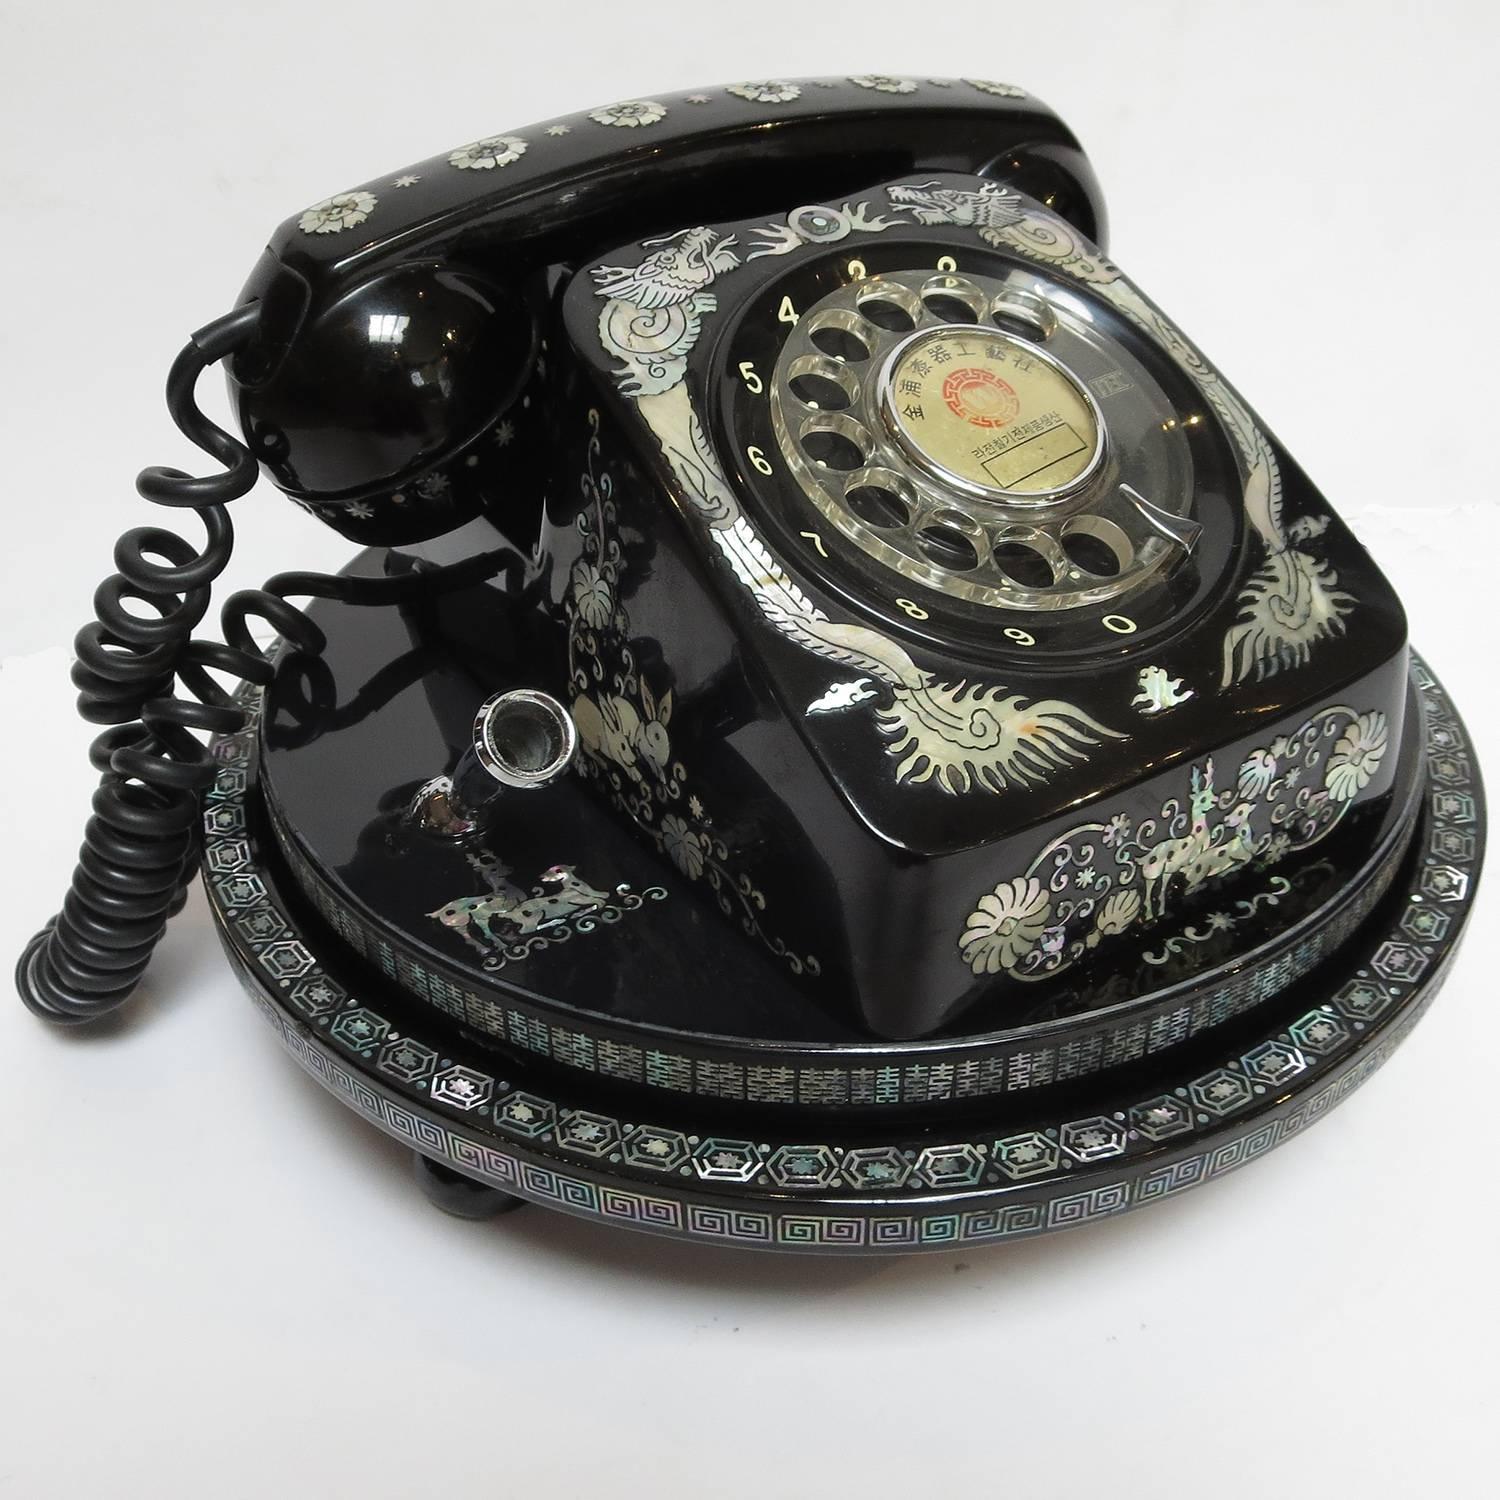 This certainly has to rank as one of the more outrageous telephones we have ever encountered! The working dial telephone is incredibly decorated with mother-of-pearl dragons, deer, rabbits, and other floral and geometric designs. The telephone sits